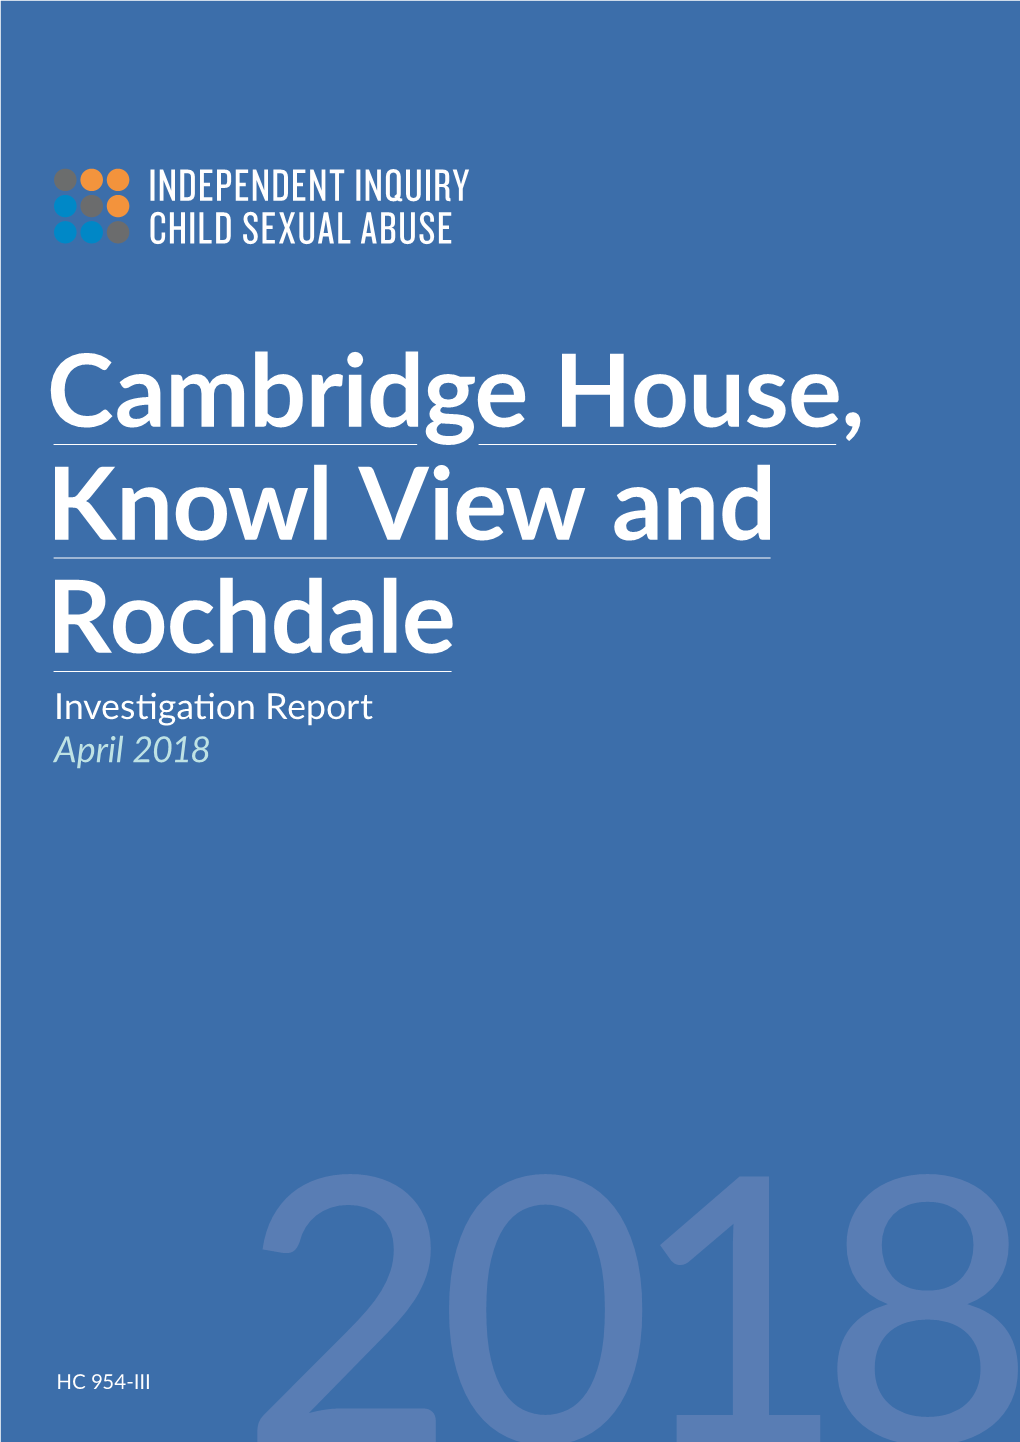 Cambridge House, Knowl View and Rochdale Cambridge House, Knowl View and Rochdale Investigation Report Investigationreport April 2018